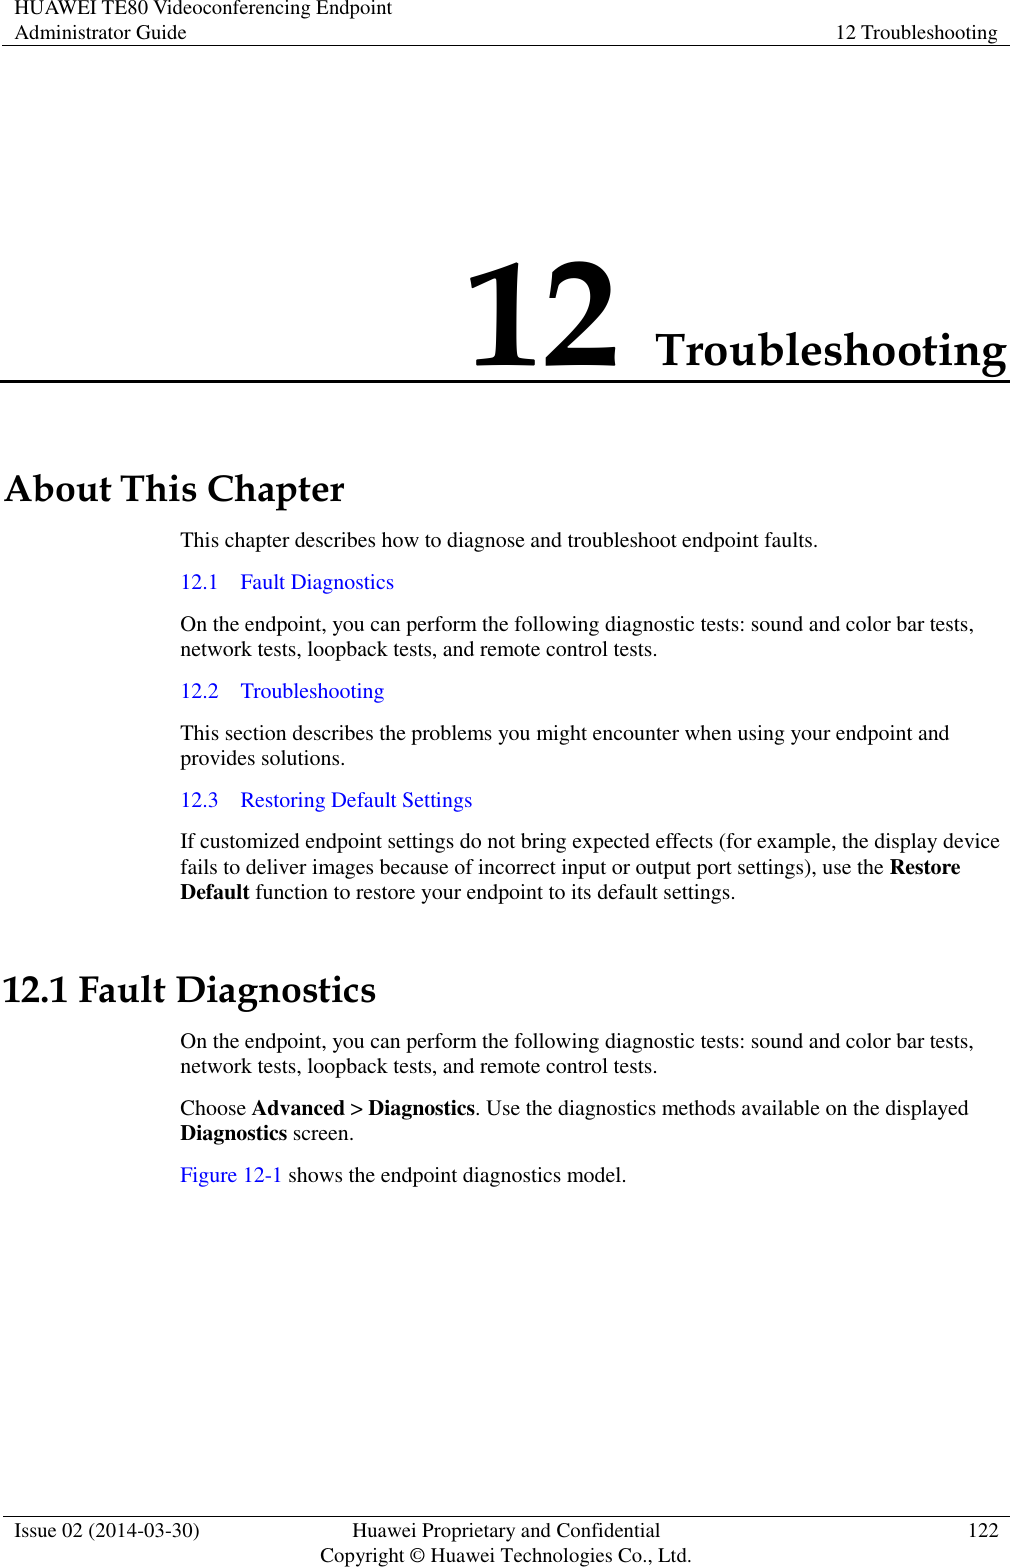 HUAWEI TE80 Videoconferencing Endpoint Administrator Guide 12 Troubleshooting  Issue 02 (2014-03-30) Huawei Proprietary and Confidential Copyright © Huawei Technologies Co., Ltd. 122  12 Troubleshooting About This Chapter This chapter describes how to diagnose and troubleshoot endpoint faults. 12.1    Fault Diagnostics On the endpoint, you can perform the following diagnostic tests: sound and color bar tests, network tests, loopback tests, and remote control tests. 12.2    Troubleshooting This section describes the problems you might encounter when using your endpoint and provides solutions. 12.3    Restoring Default Settings If customized endpoint settings do not bring expected effects (for example, the display device fails to deliver images because of incorrect input or output port settings), use the Restore Default function to restore your endpoint to its default settings. 12.1 Fault Diagnostics On the endpoint, you can perform the following diagnostic tests: sound and color bar tests, network tests, loopback tests, and remote control tests. Choose Advanced &gt; Diagnostics. Use the diagnostics methods available on the displayed Diagnostics screen. Figure 12-1 shows the endpoint diagnostics model. 